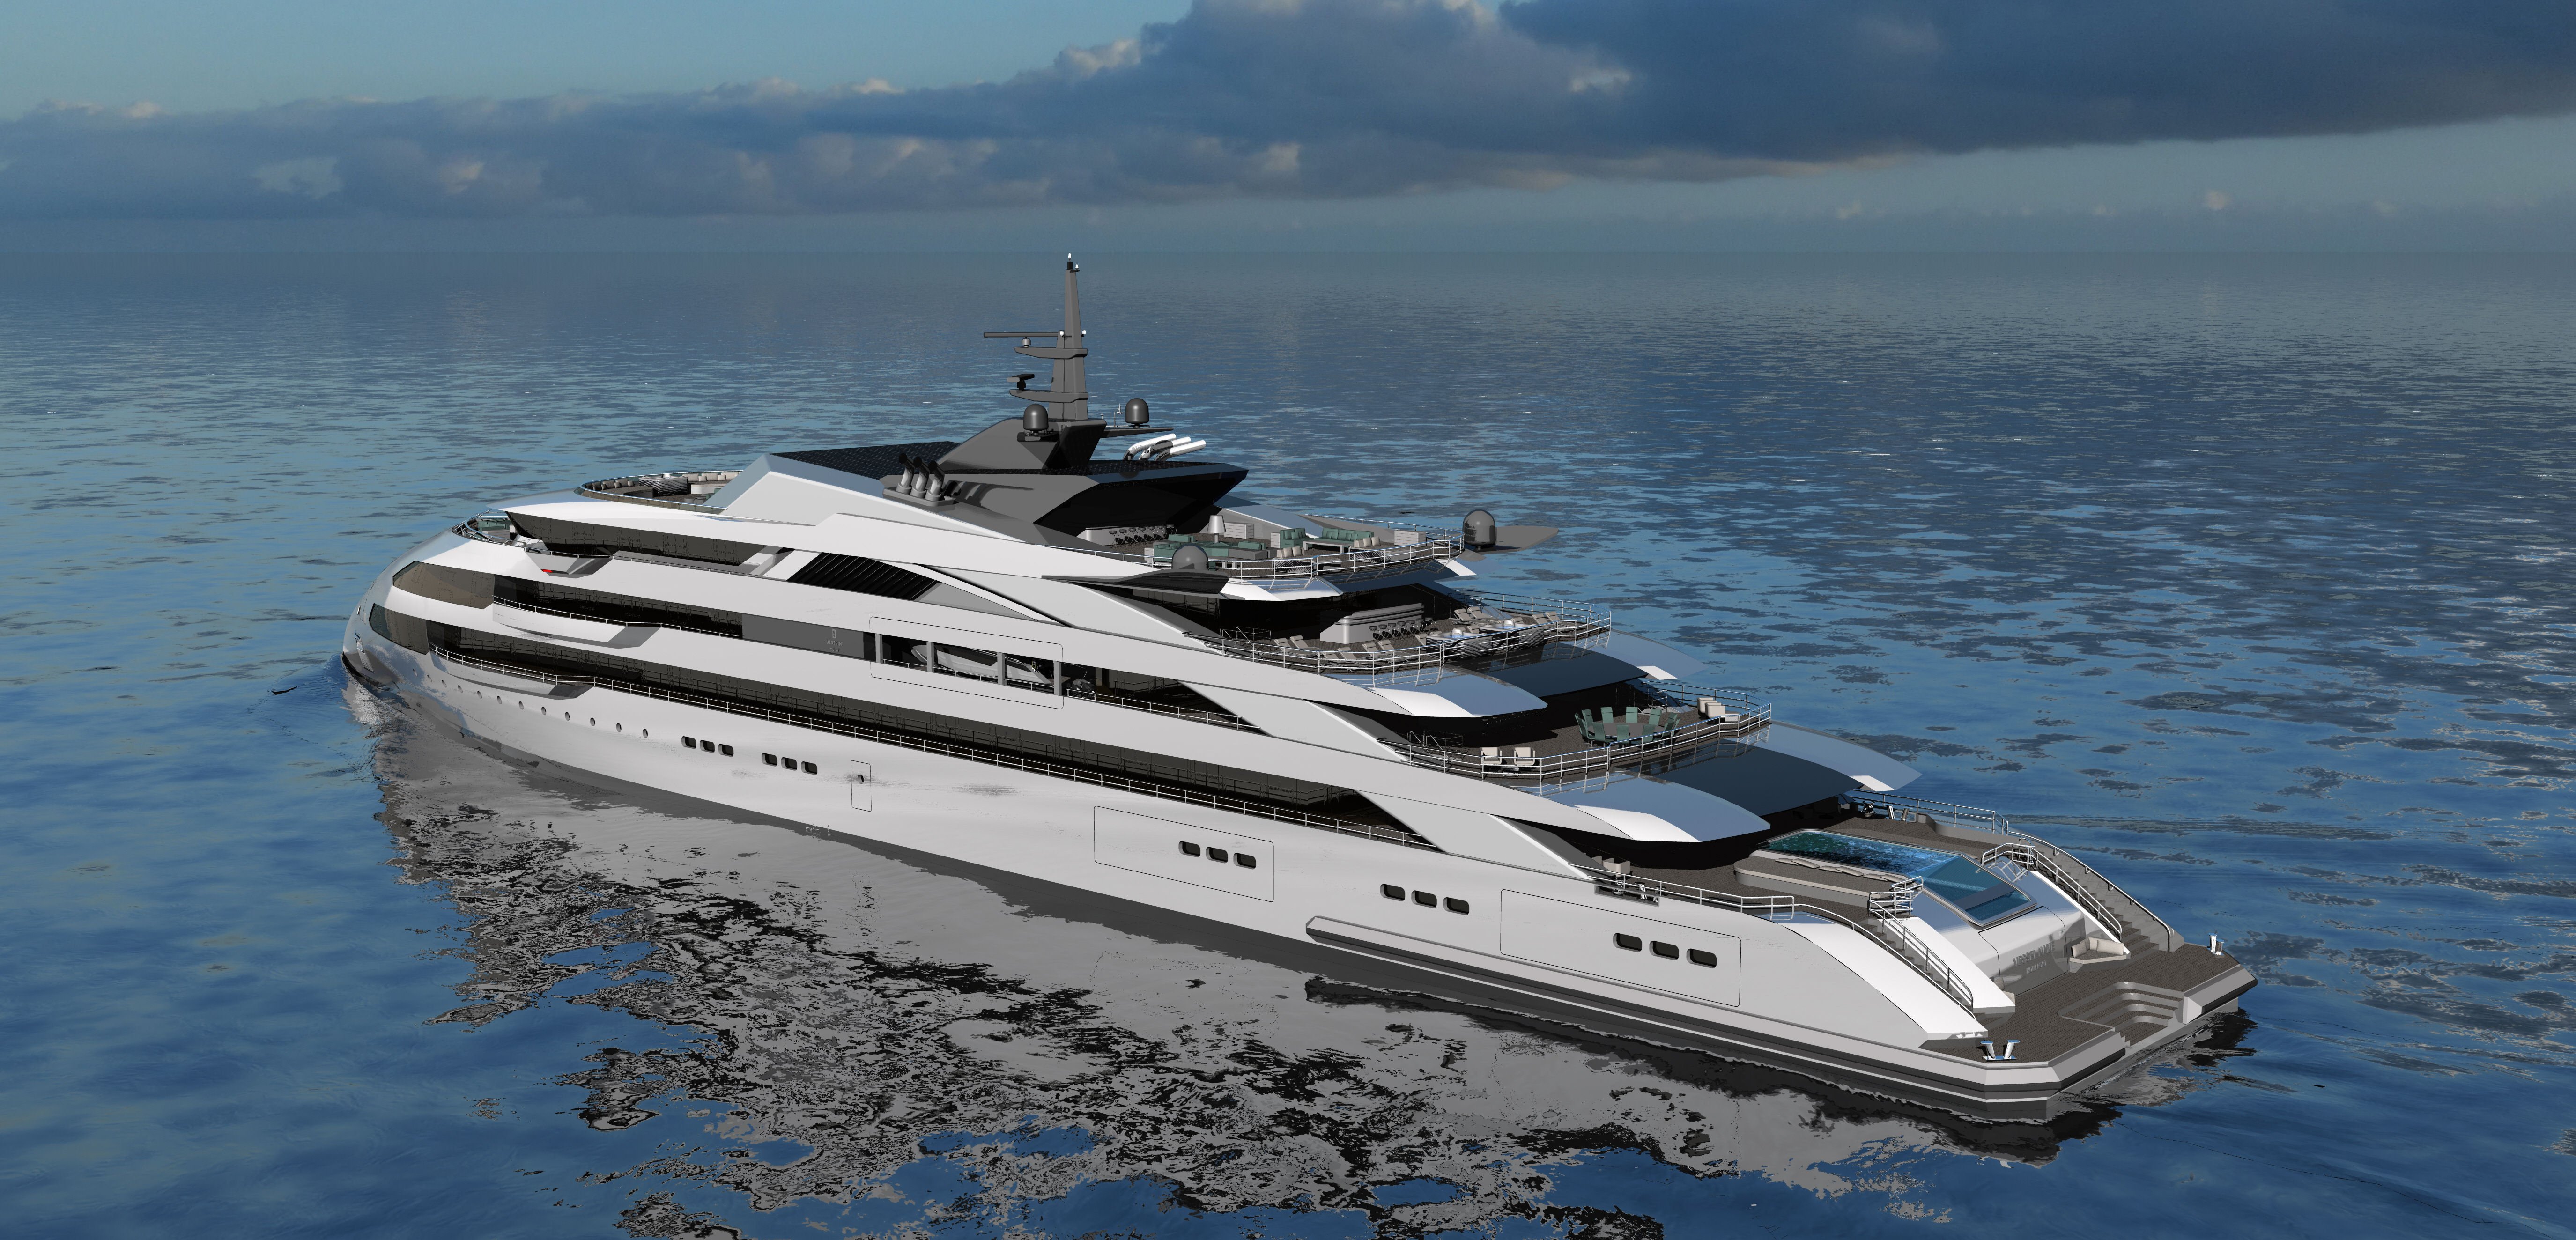 An ULSTEIN CX123 design, a 120m expedition cruise vessel/private yacht with accommodation for 36 guests.